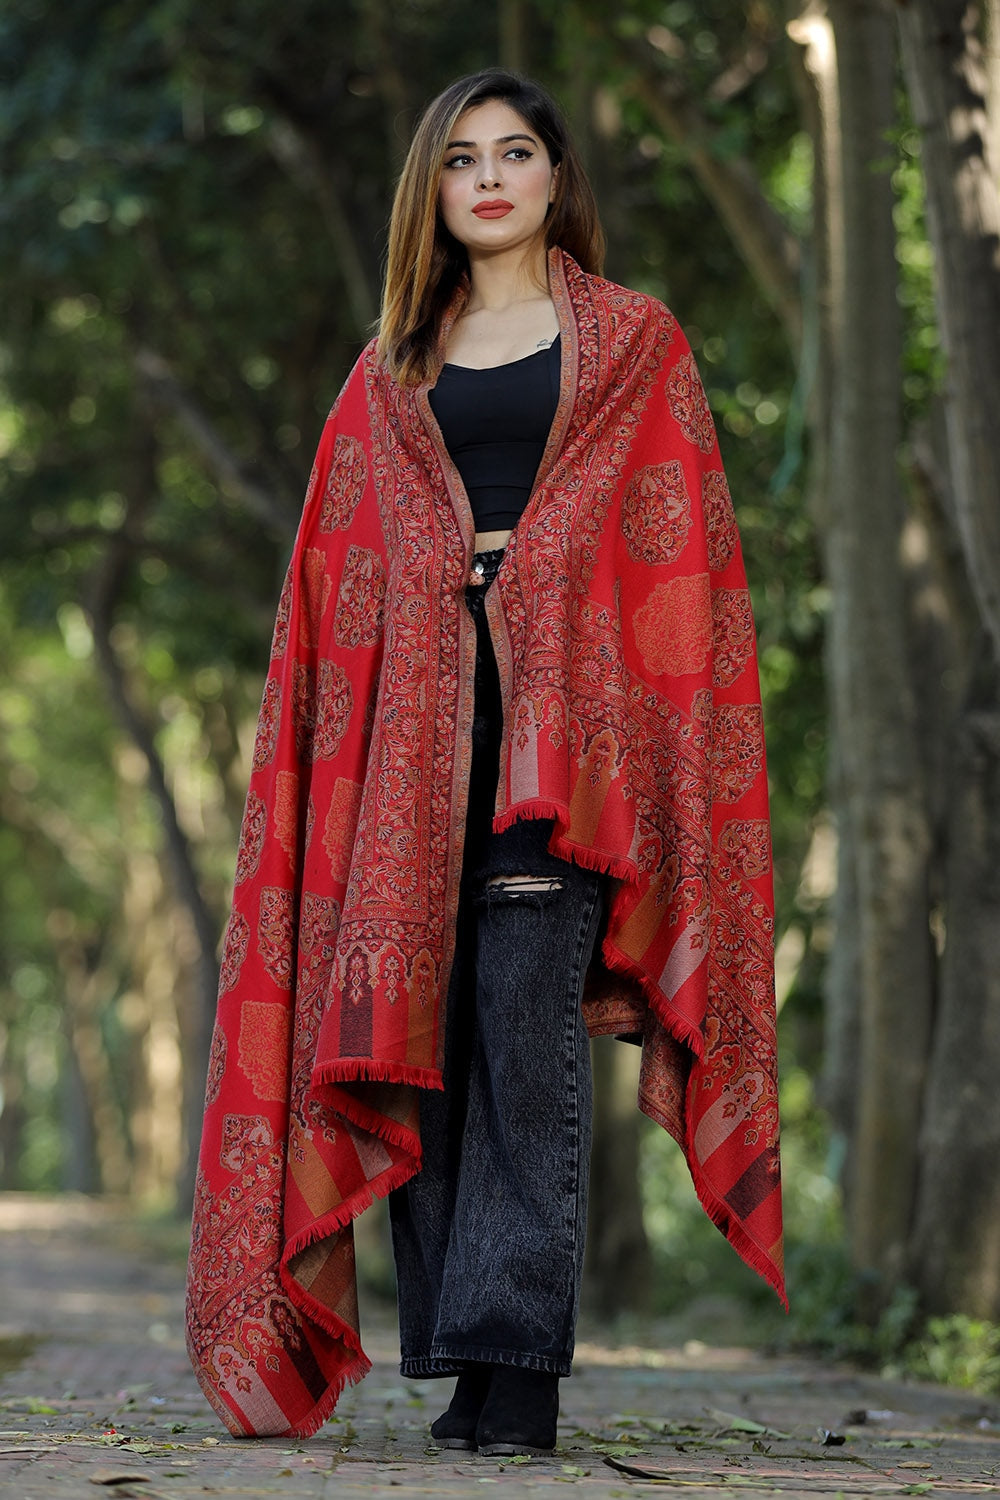 RED COLOUR SHAWL WITH ZARI & KANI WORK DEFINES ROYAL